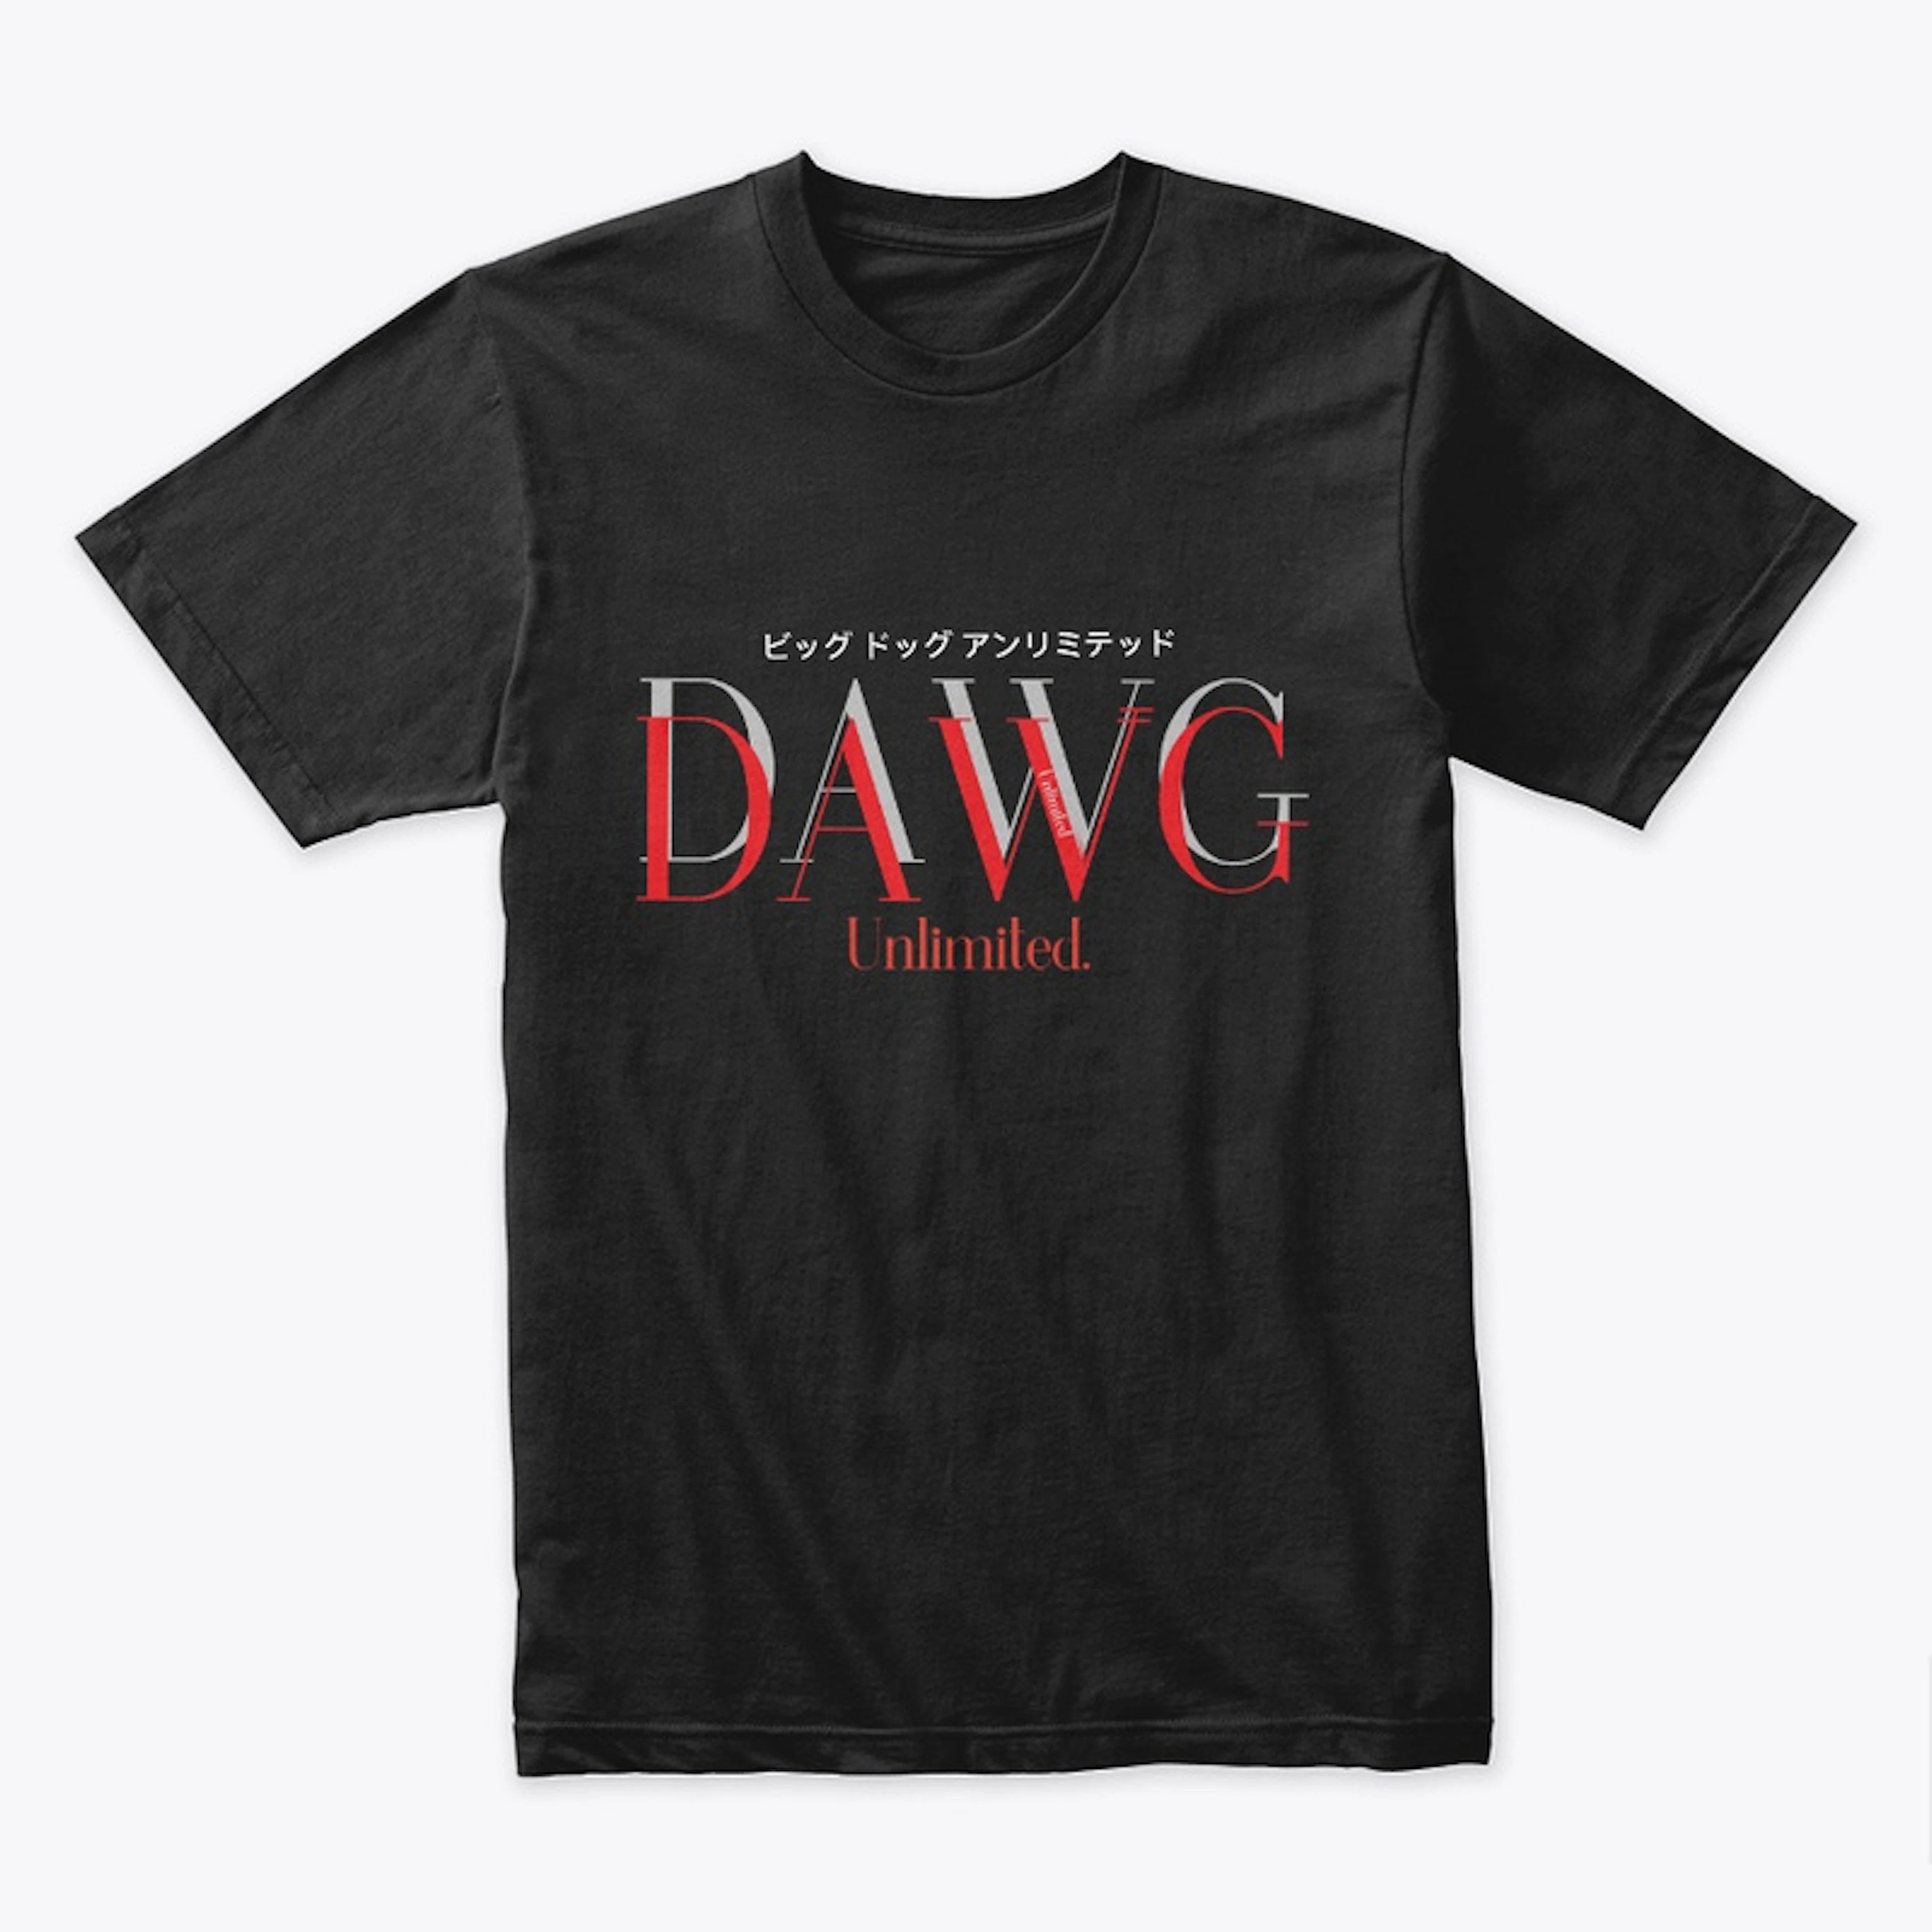 Dawg: Unlimited Collection 002